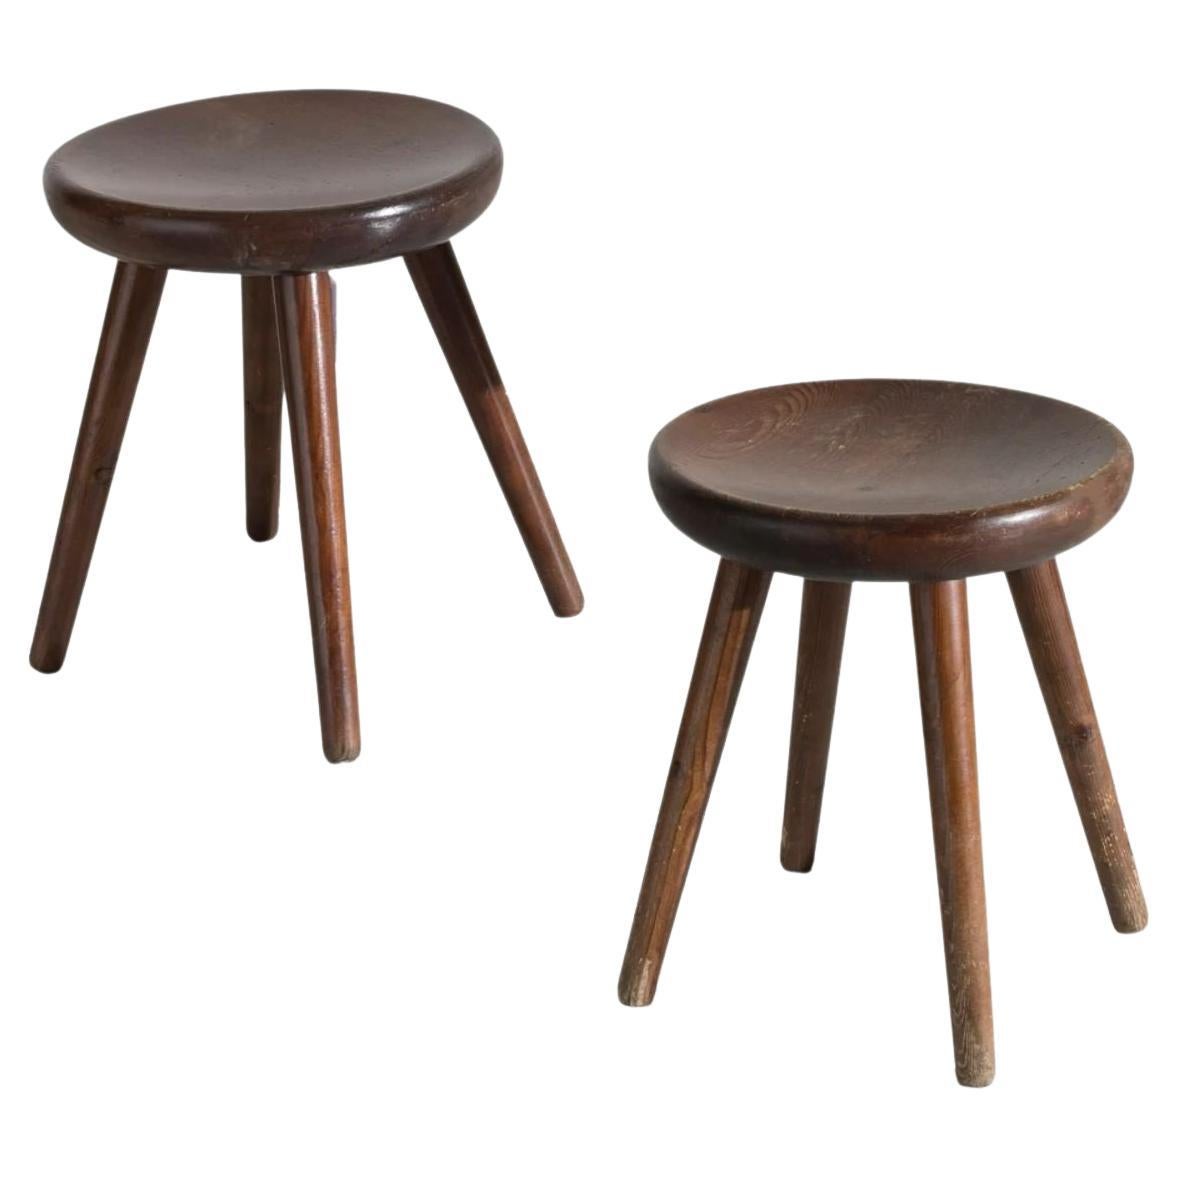 Pair of Four Legged Stools by Charlotte Perriand for Les Arcs For Sale